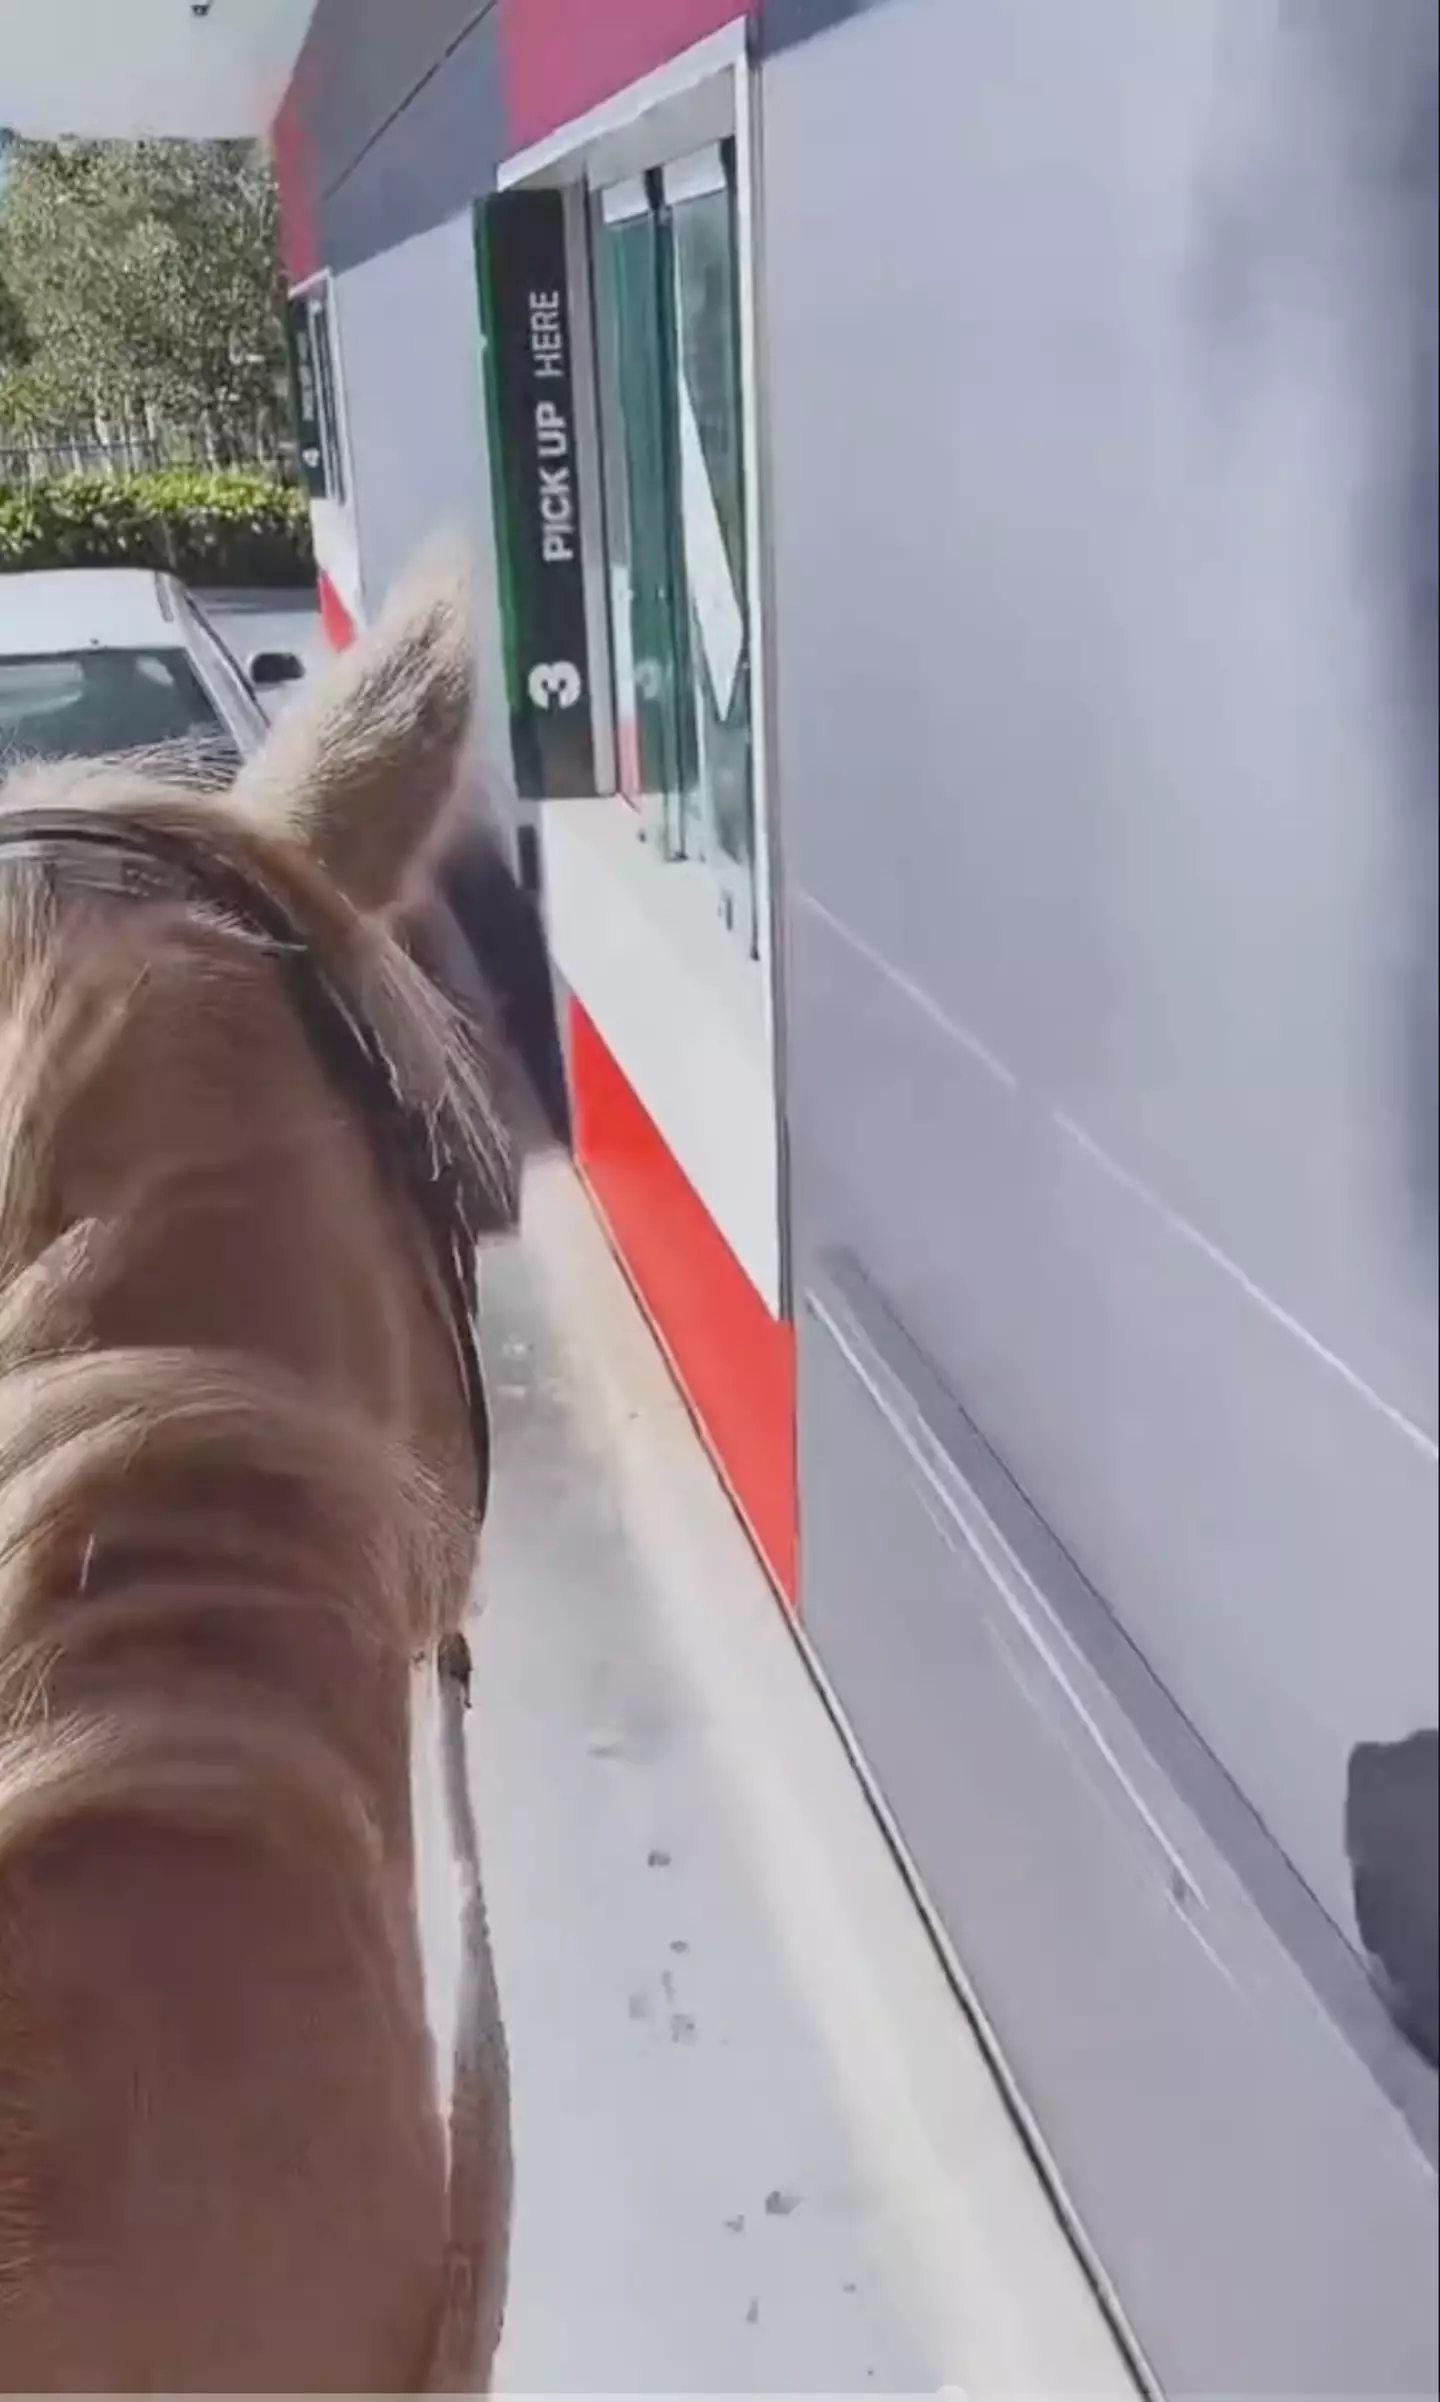 The woman rode straight up to the McDonald's drive-thru window on her horse.